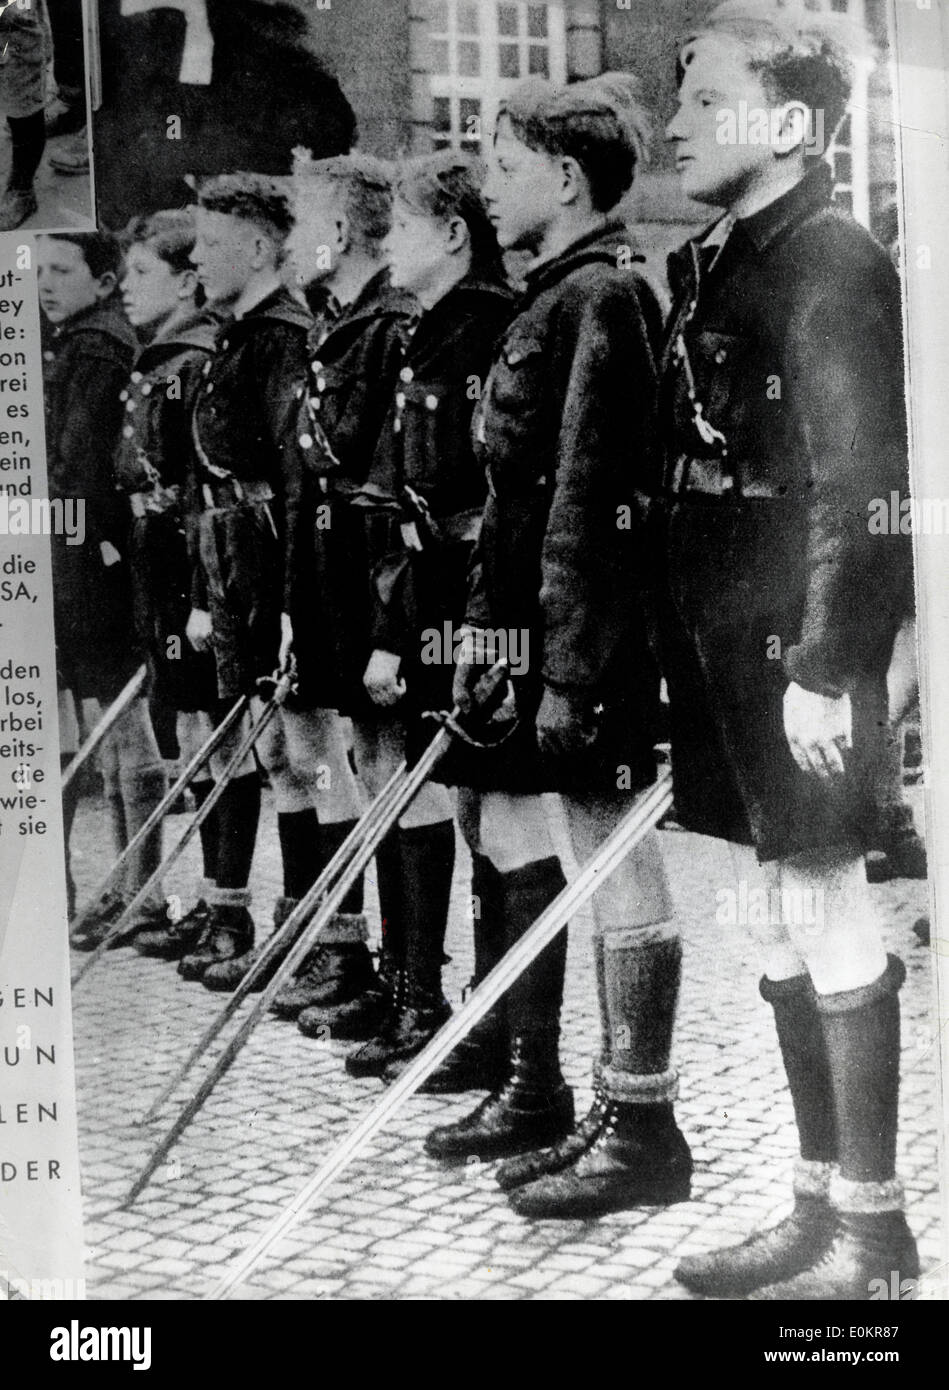 Hitler Youth lined up Stock Photo